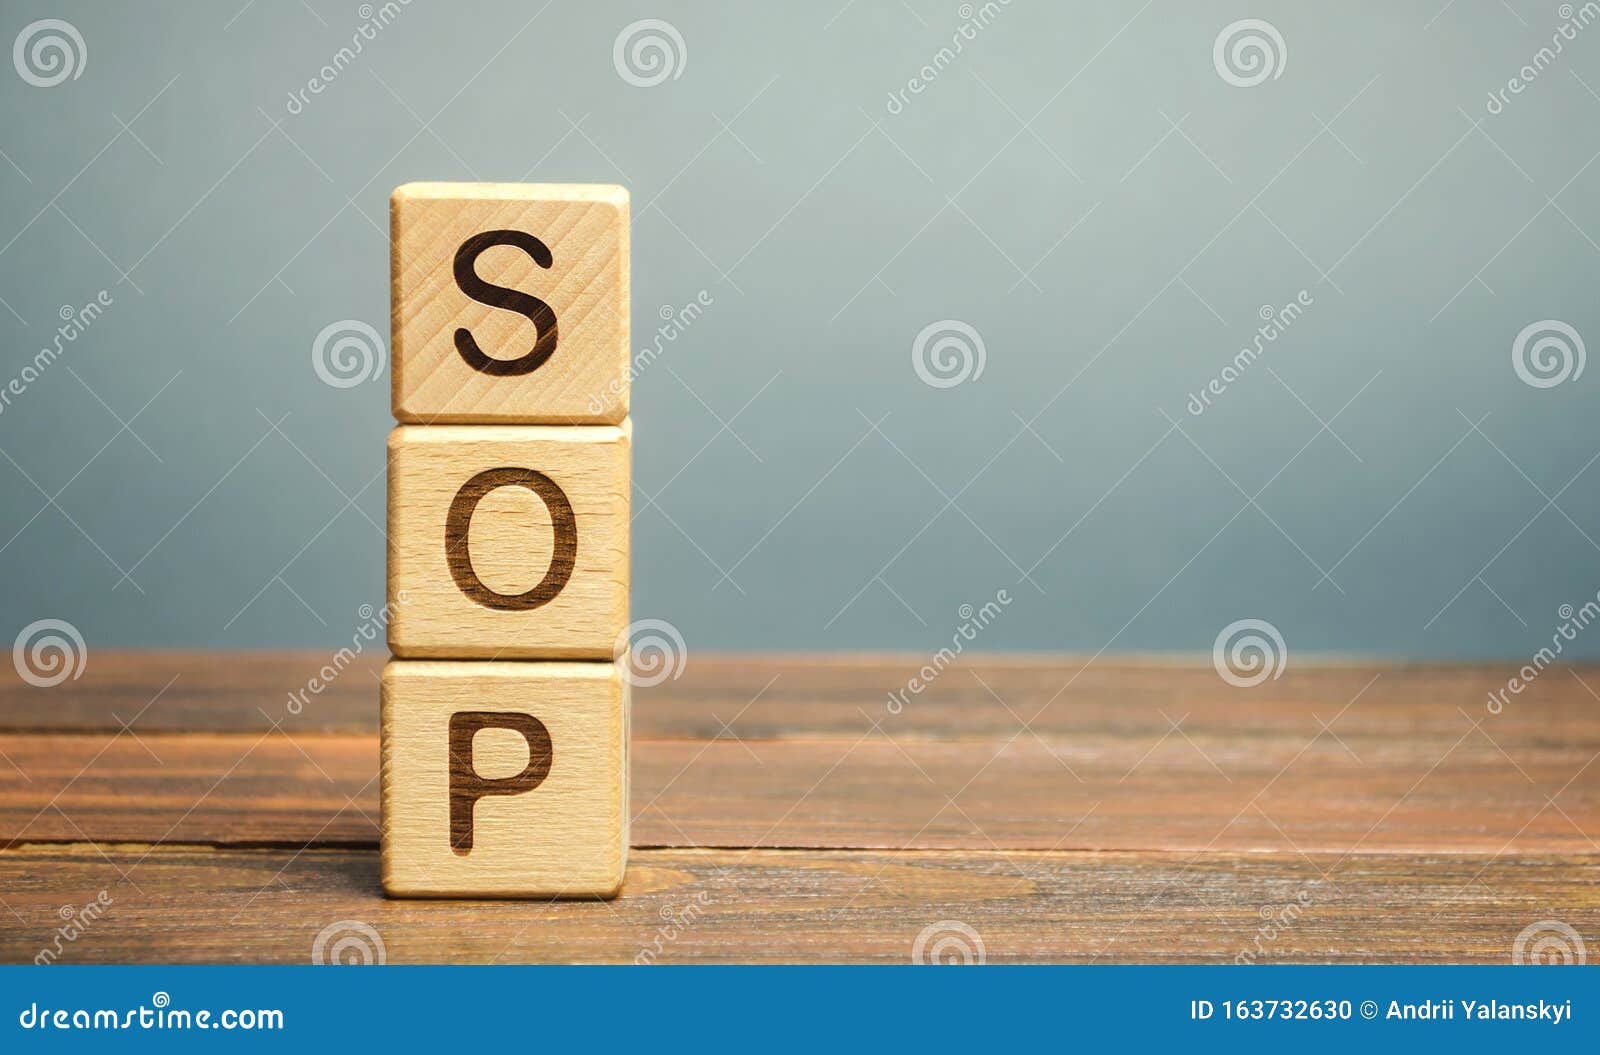 wooden blocks with the word sop  standard operating procedure . instructions to assist employees in complex routine operations.